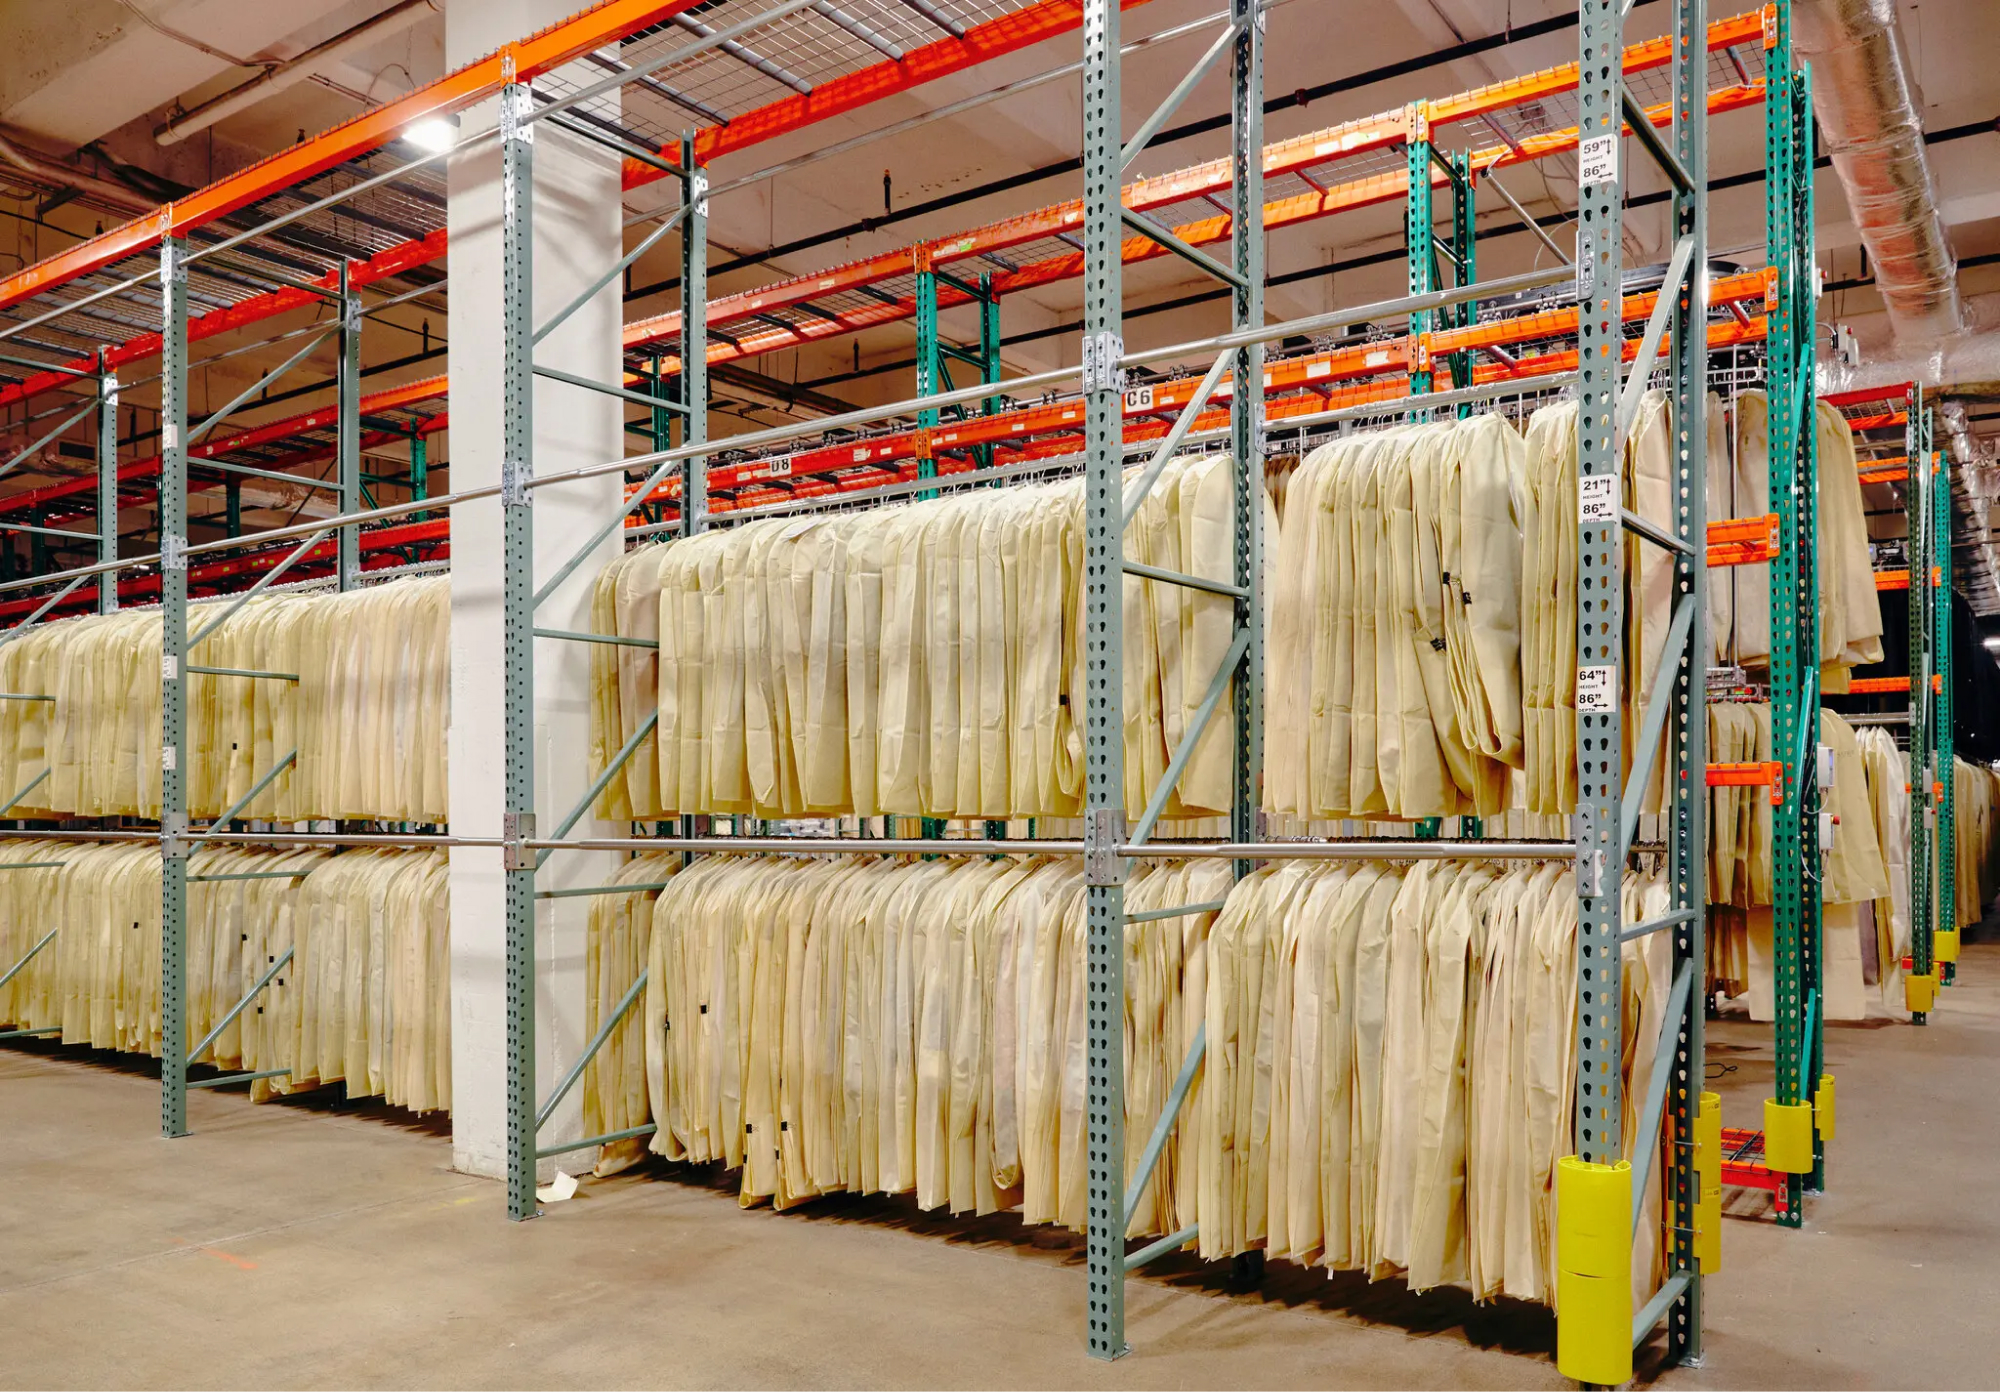 Expansive warehouse space filled with multi-level racks of yellow-colored garment bags.